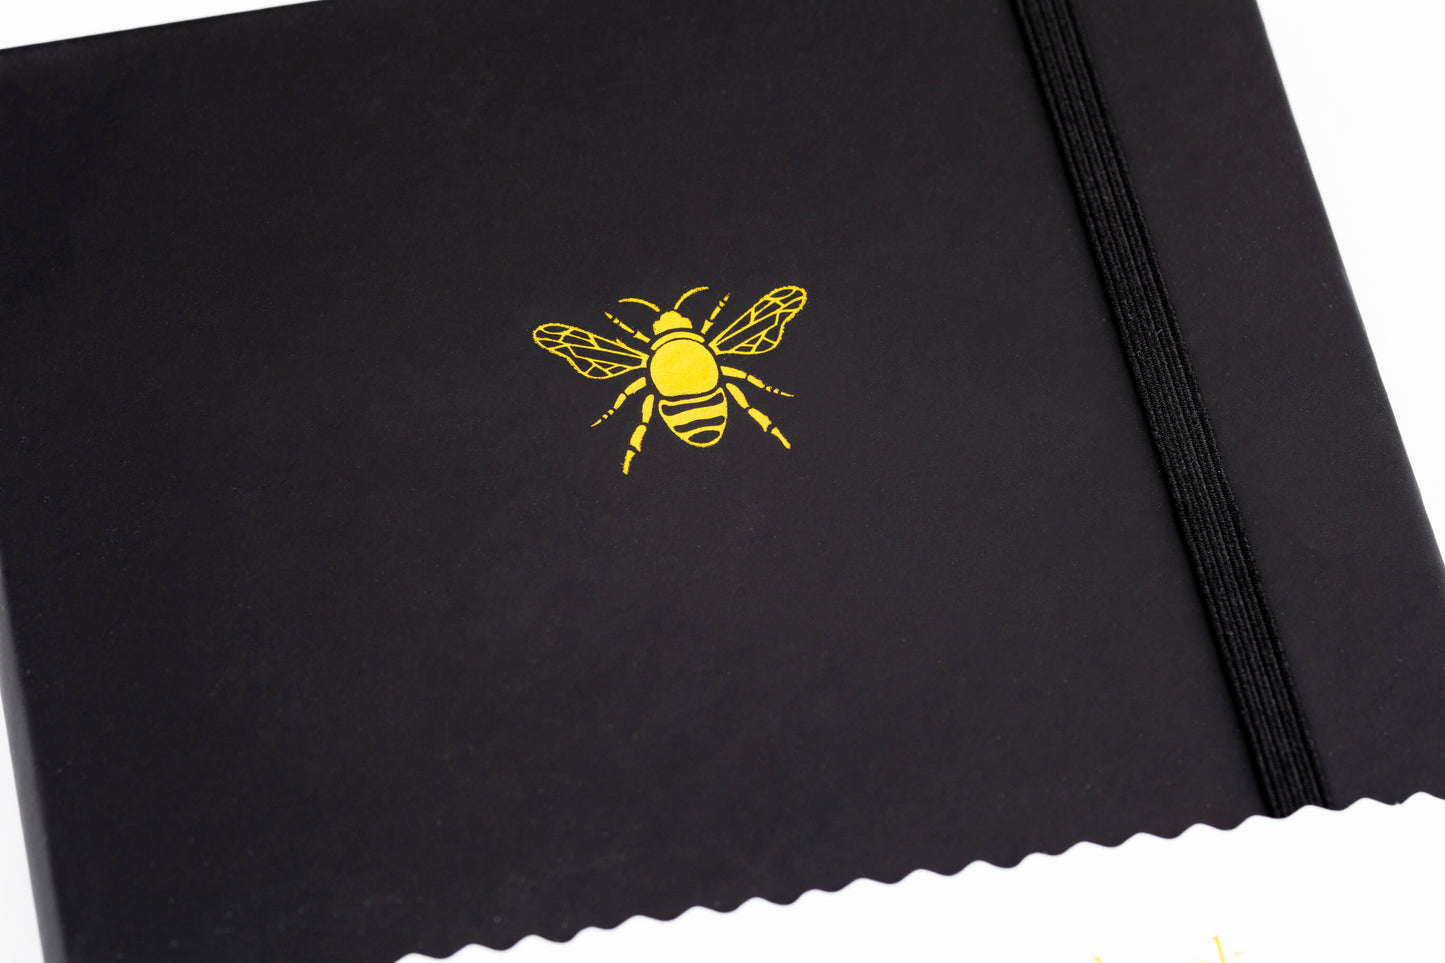 Bee A5 Dotted Notebook